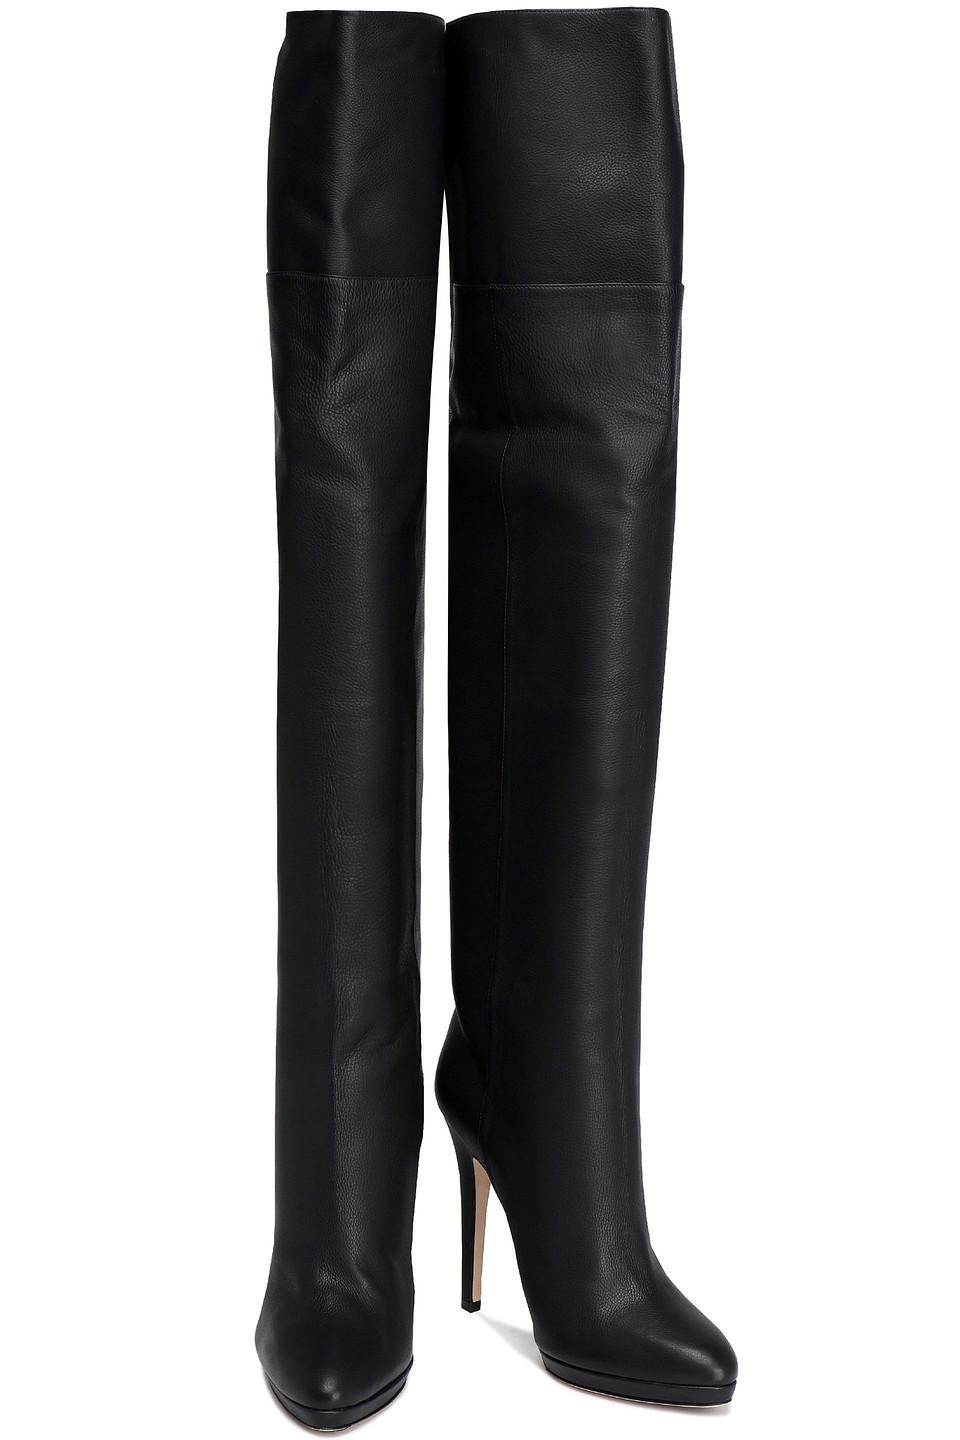 Jimmy Choo Giselle 120 Textured-leather Platform Over-the-knee Boots ...